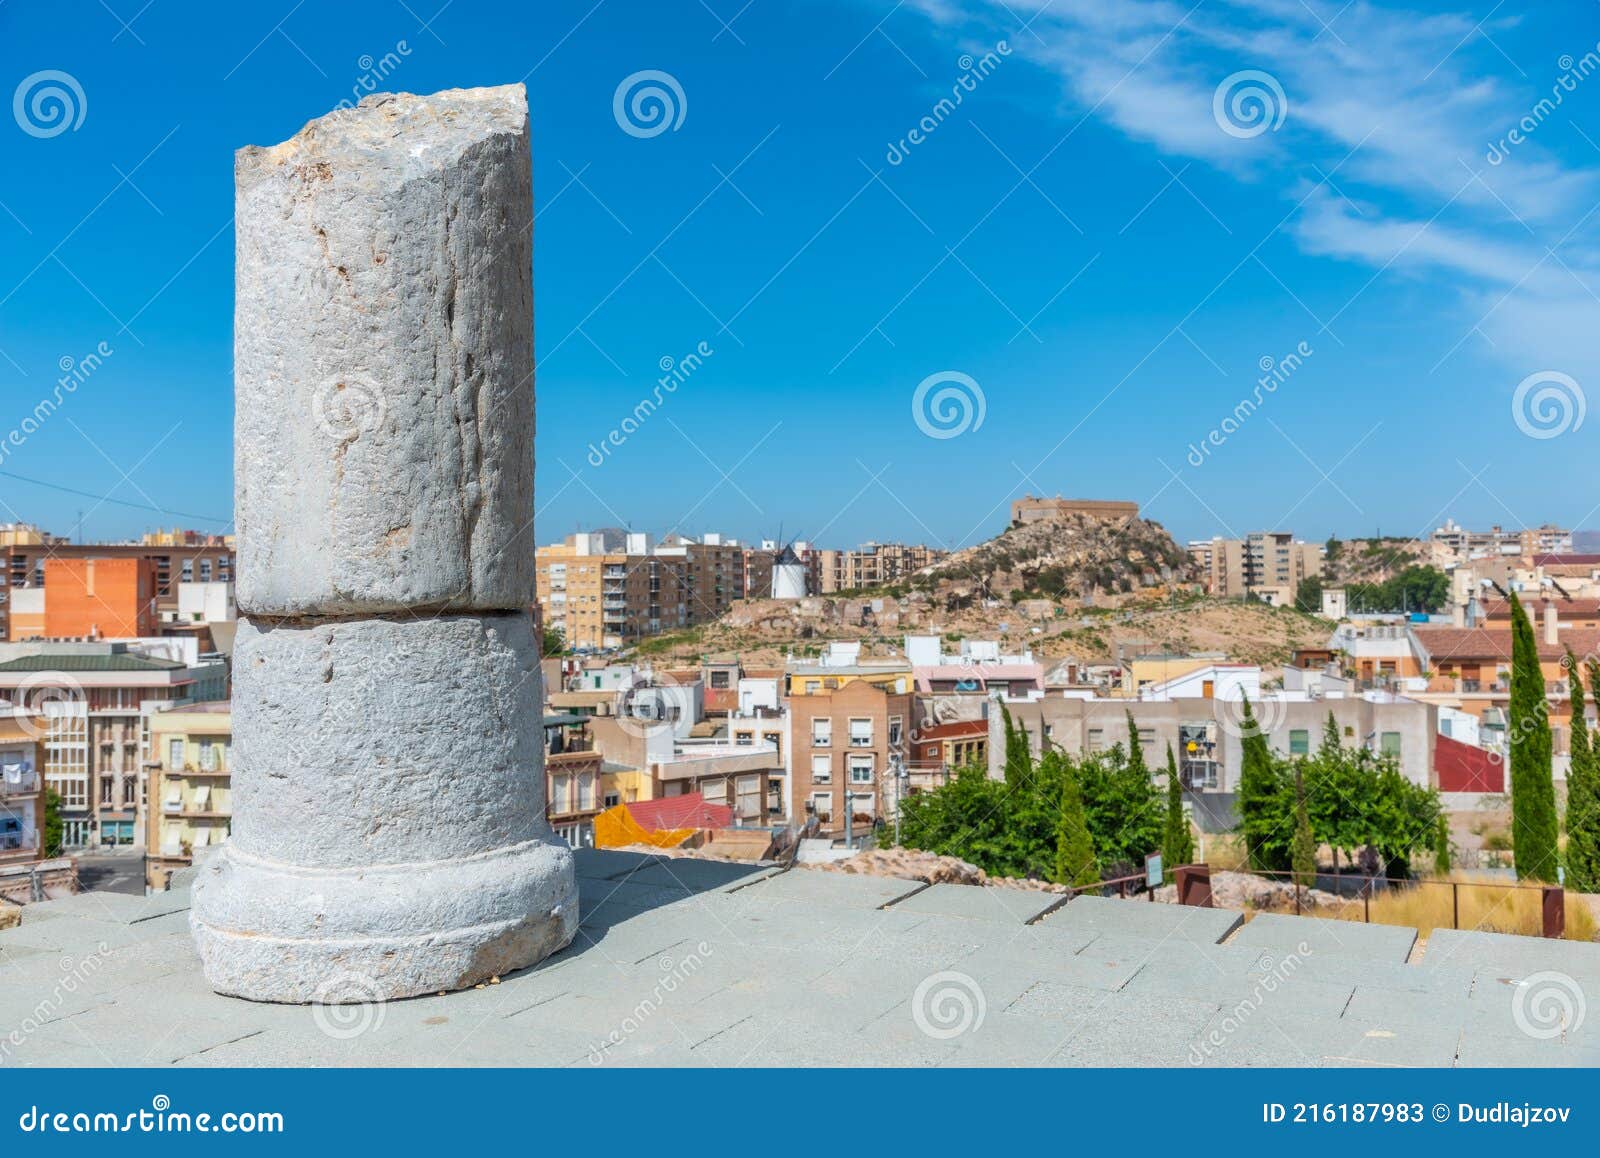 windmill and fortress on monte sacro viewed from archeological park on cerro del molinete in cartagena, spain